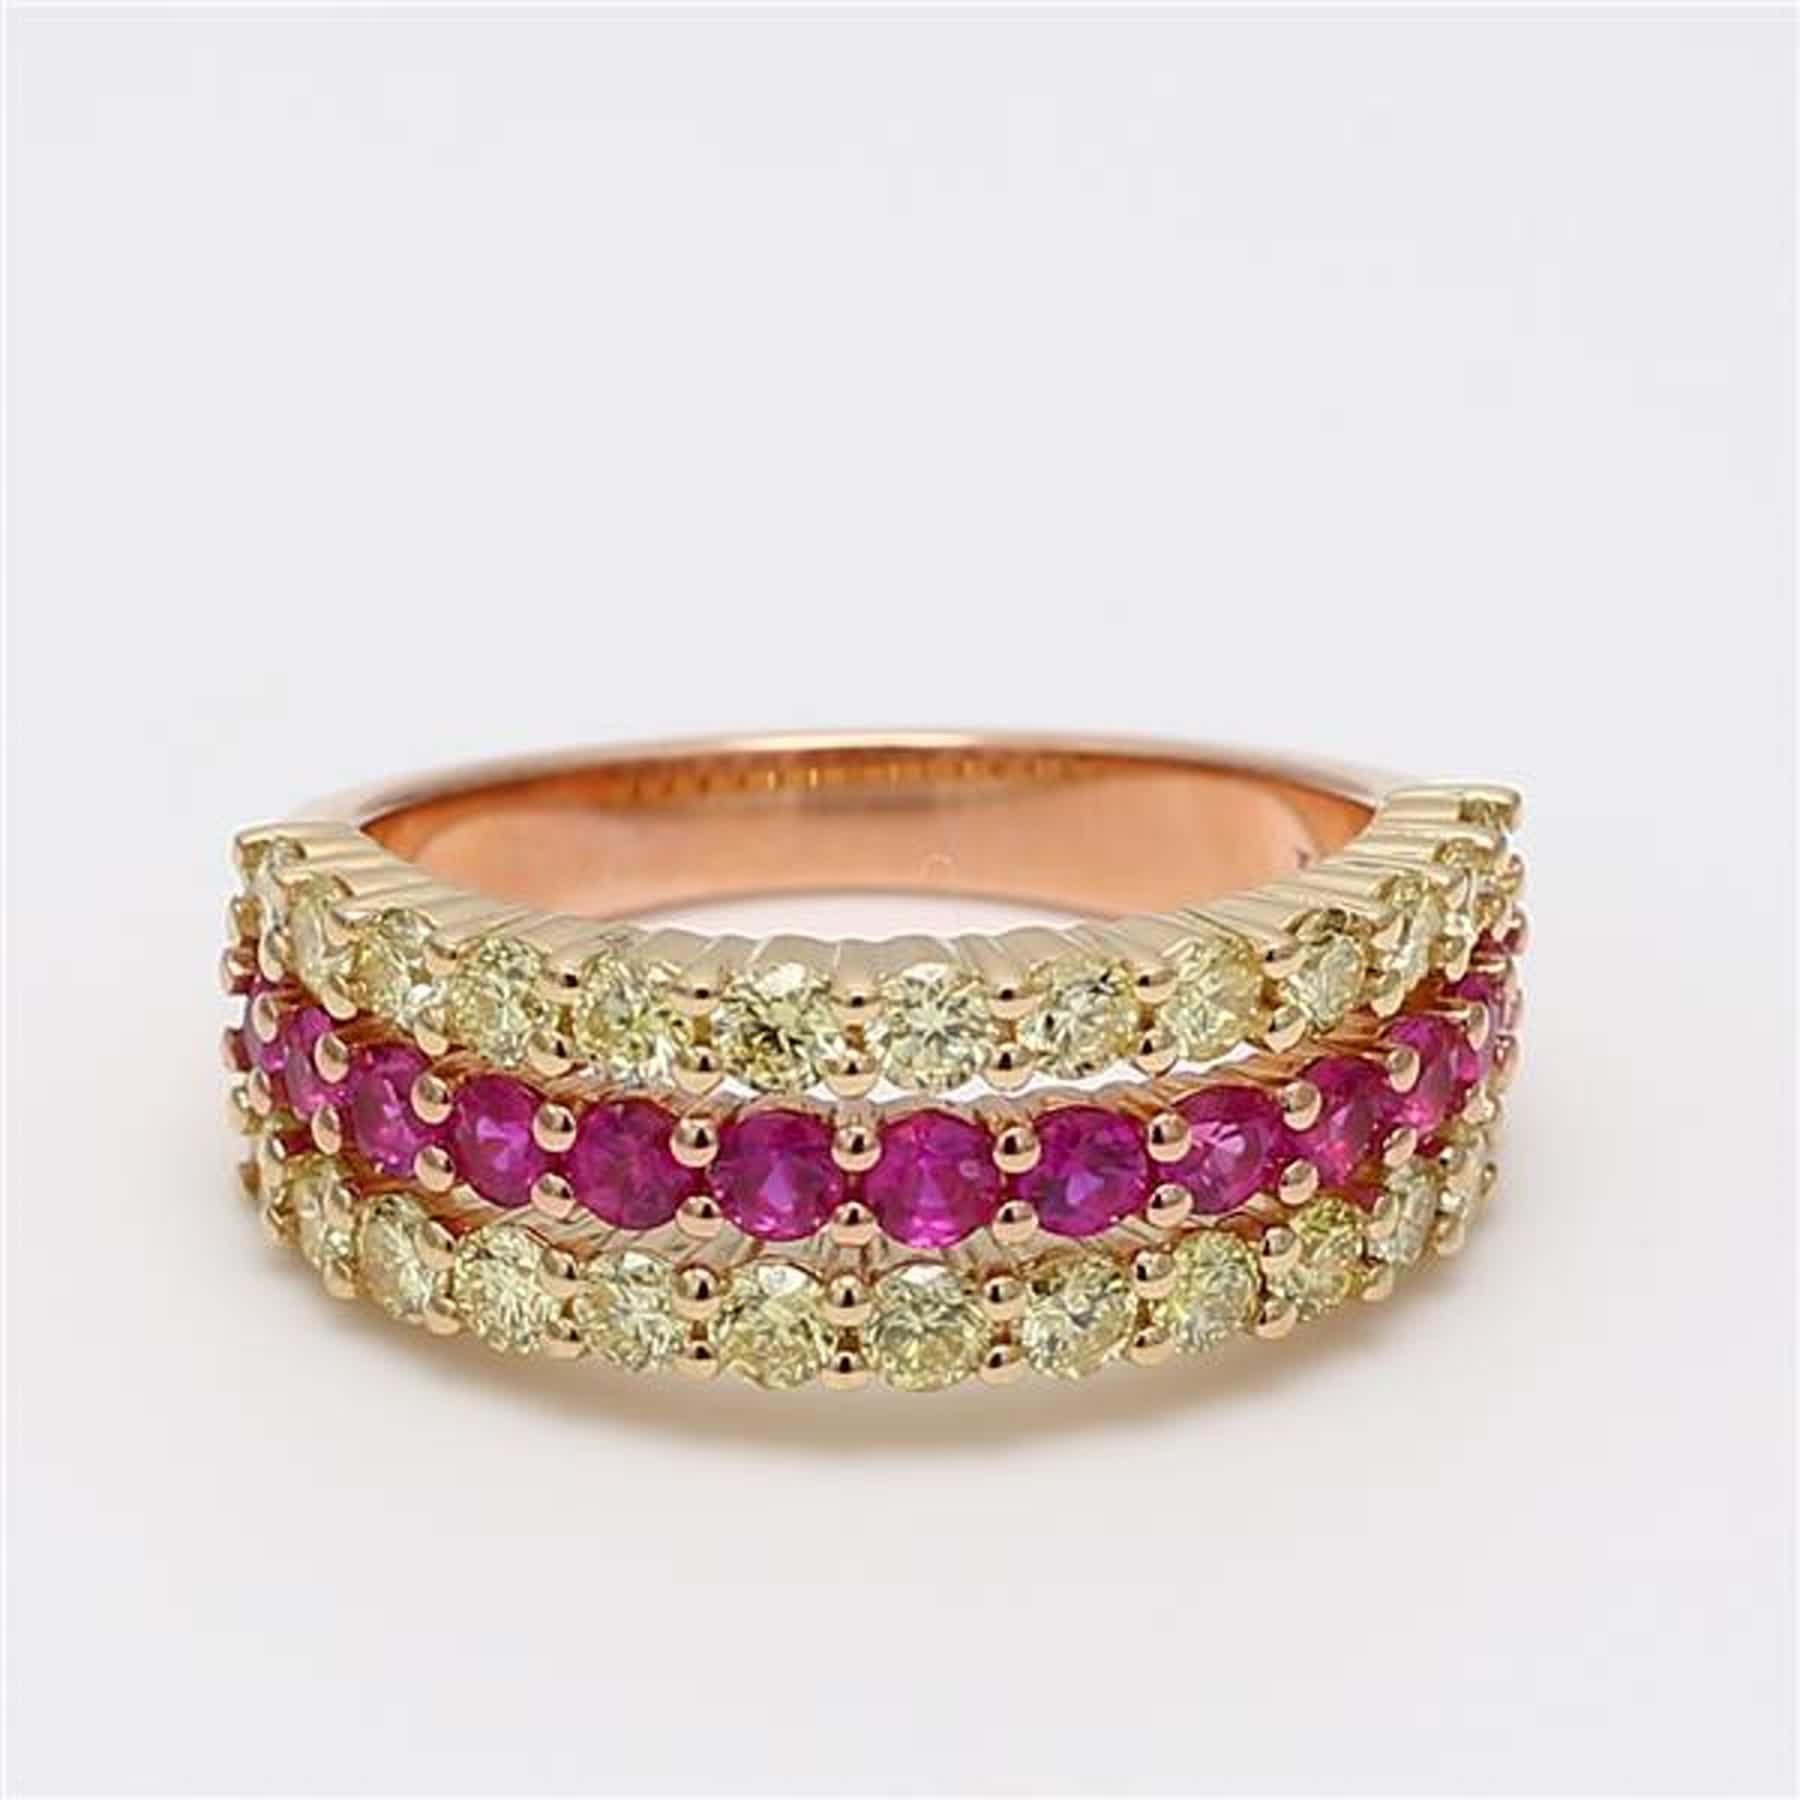 RareGemWorld's classic ruby band. Mounted in a beautiful 14K Rose Gold setting with a natural round cut red ruby's complimented by natural round yellow diamond melee. This band is guaranteed to impress and enhance your personal collection!